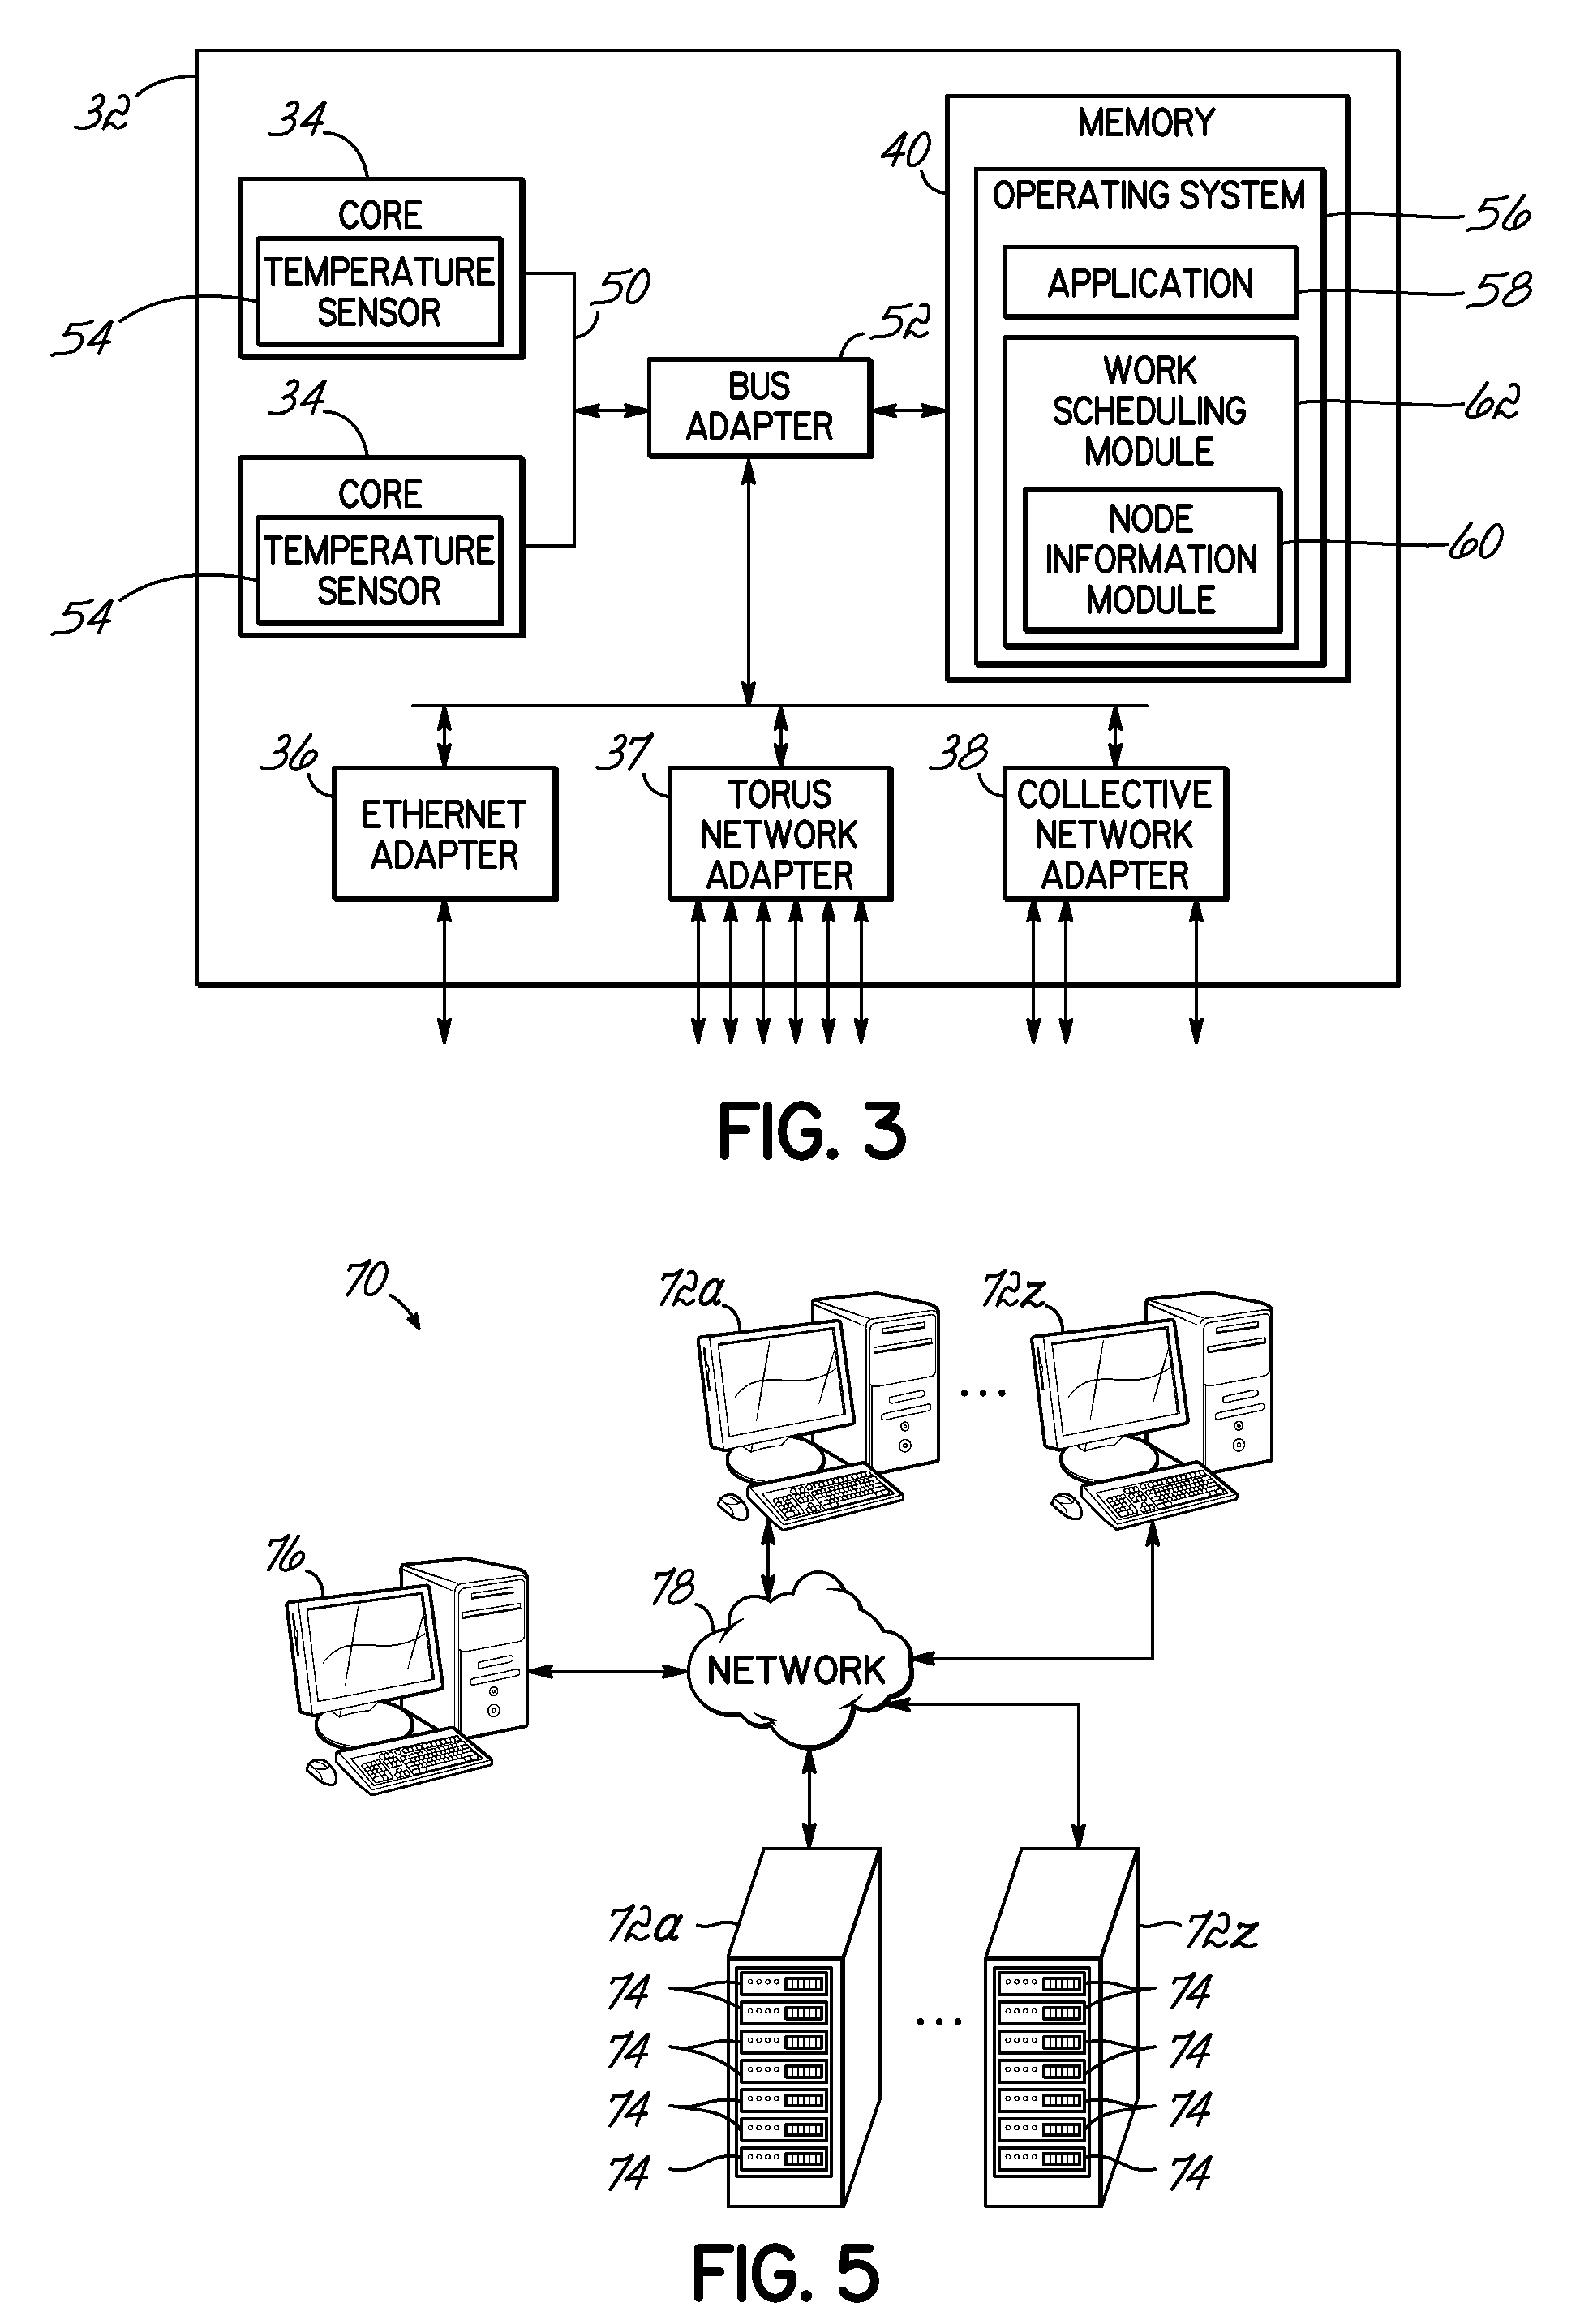 Environment based node selection for work scheduling in a parallel computing system